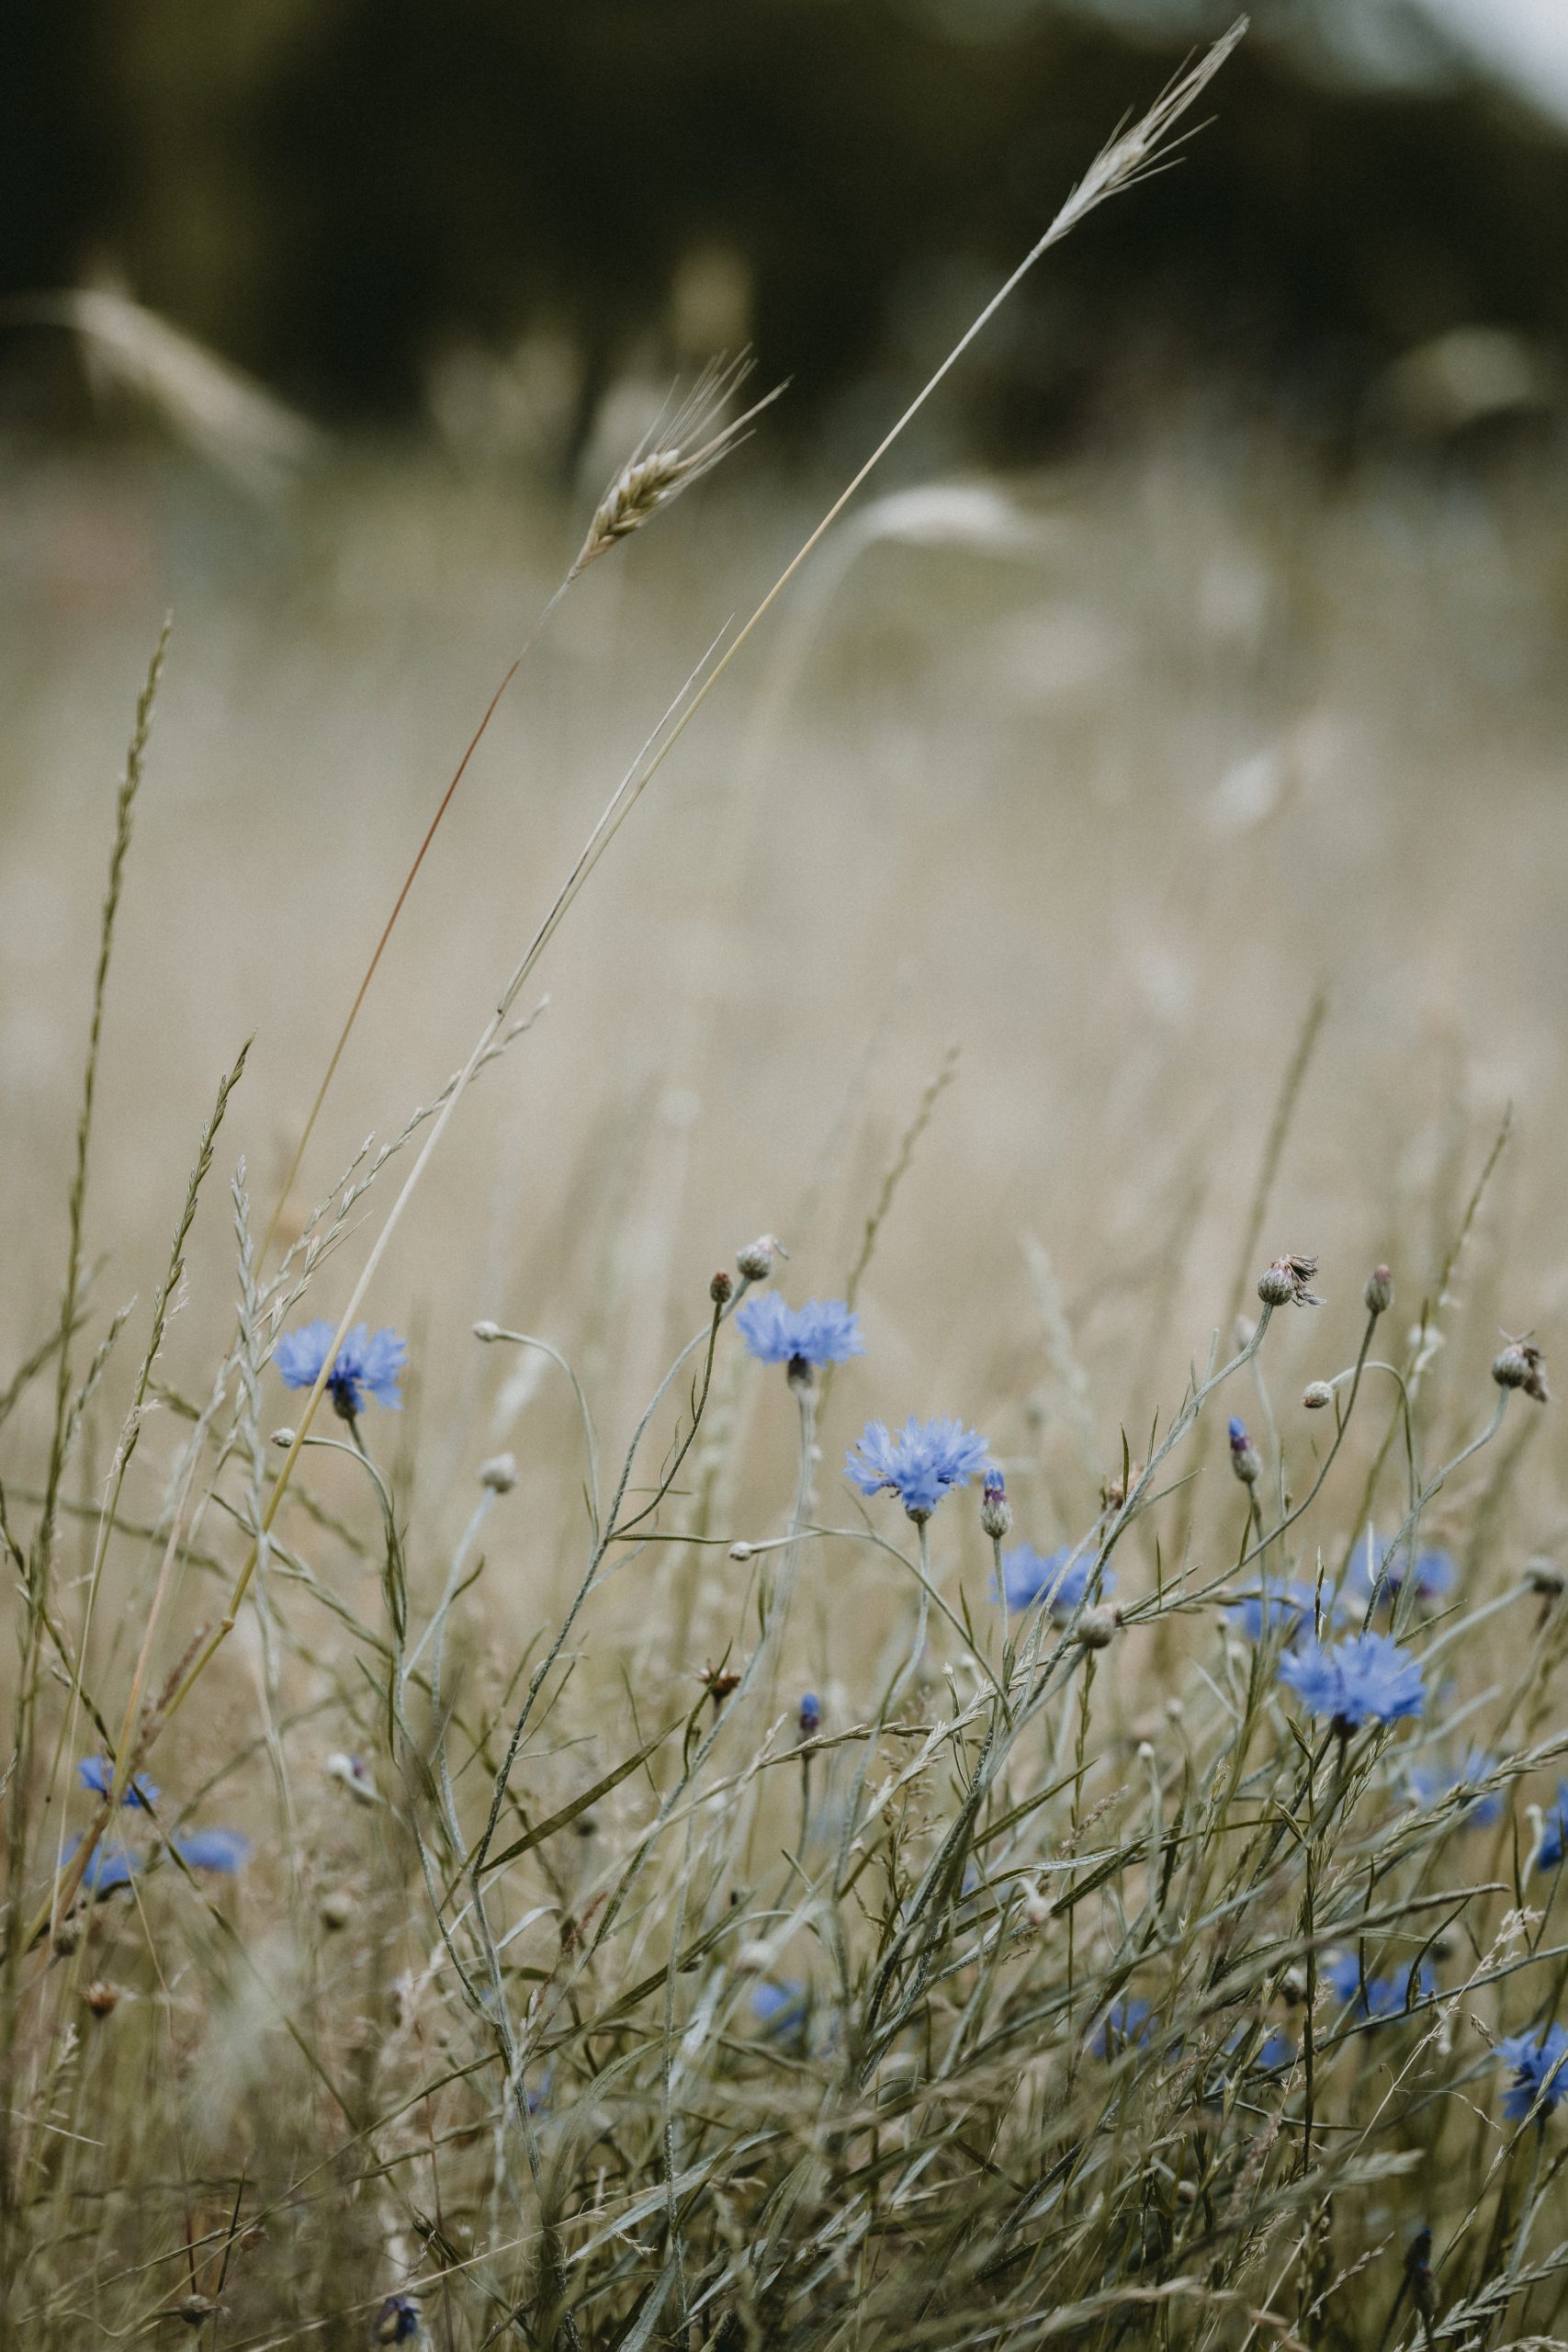 A close-up photograph of a cluster of small blue wildflowers growing in a peaceful field.